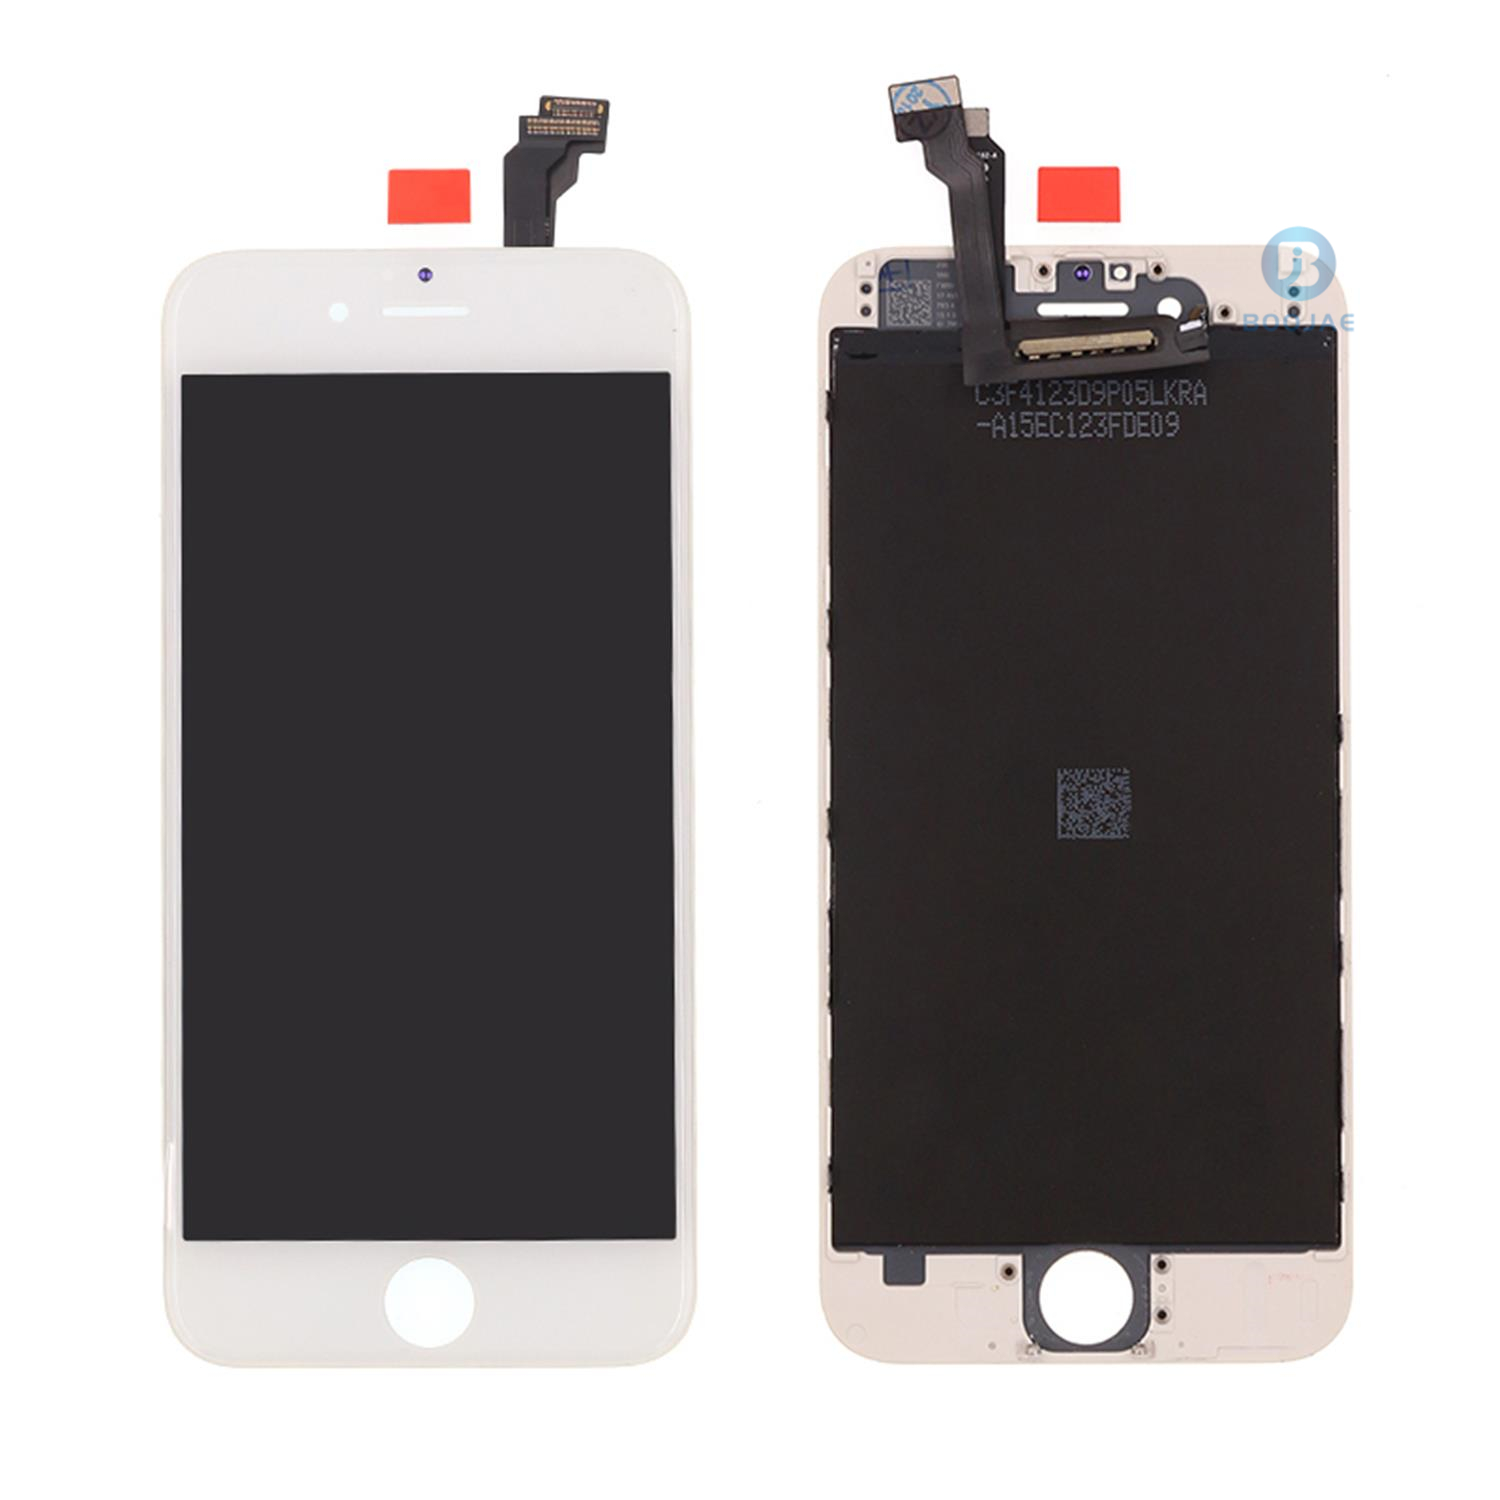 iPhone 6 LCD Screen Display and Wholesale iPhone Screens